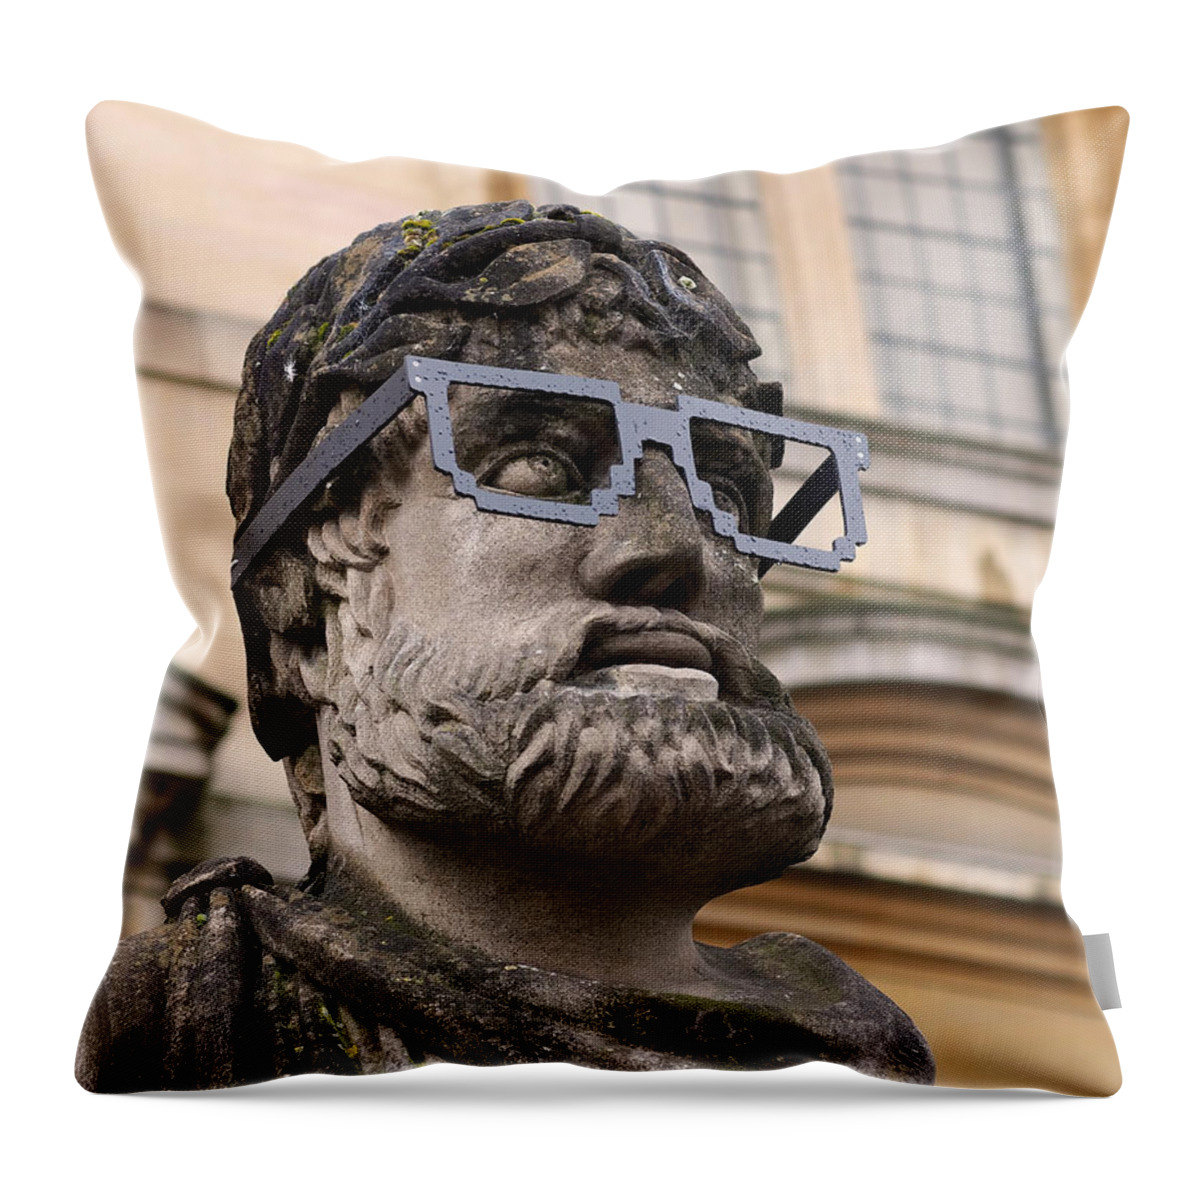 Geeks Throw Pillow featuring the photograph Oxford Geek by Rona Black